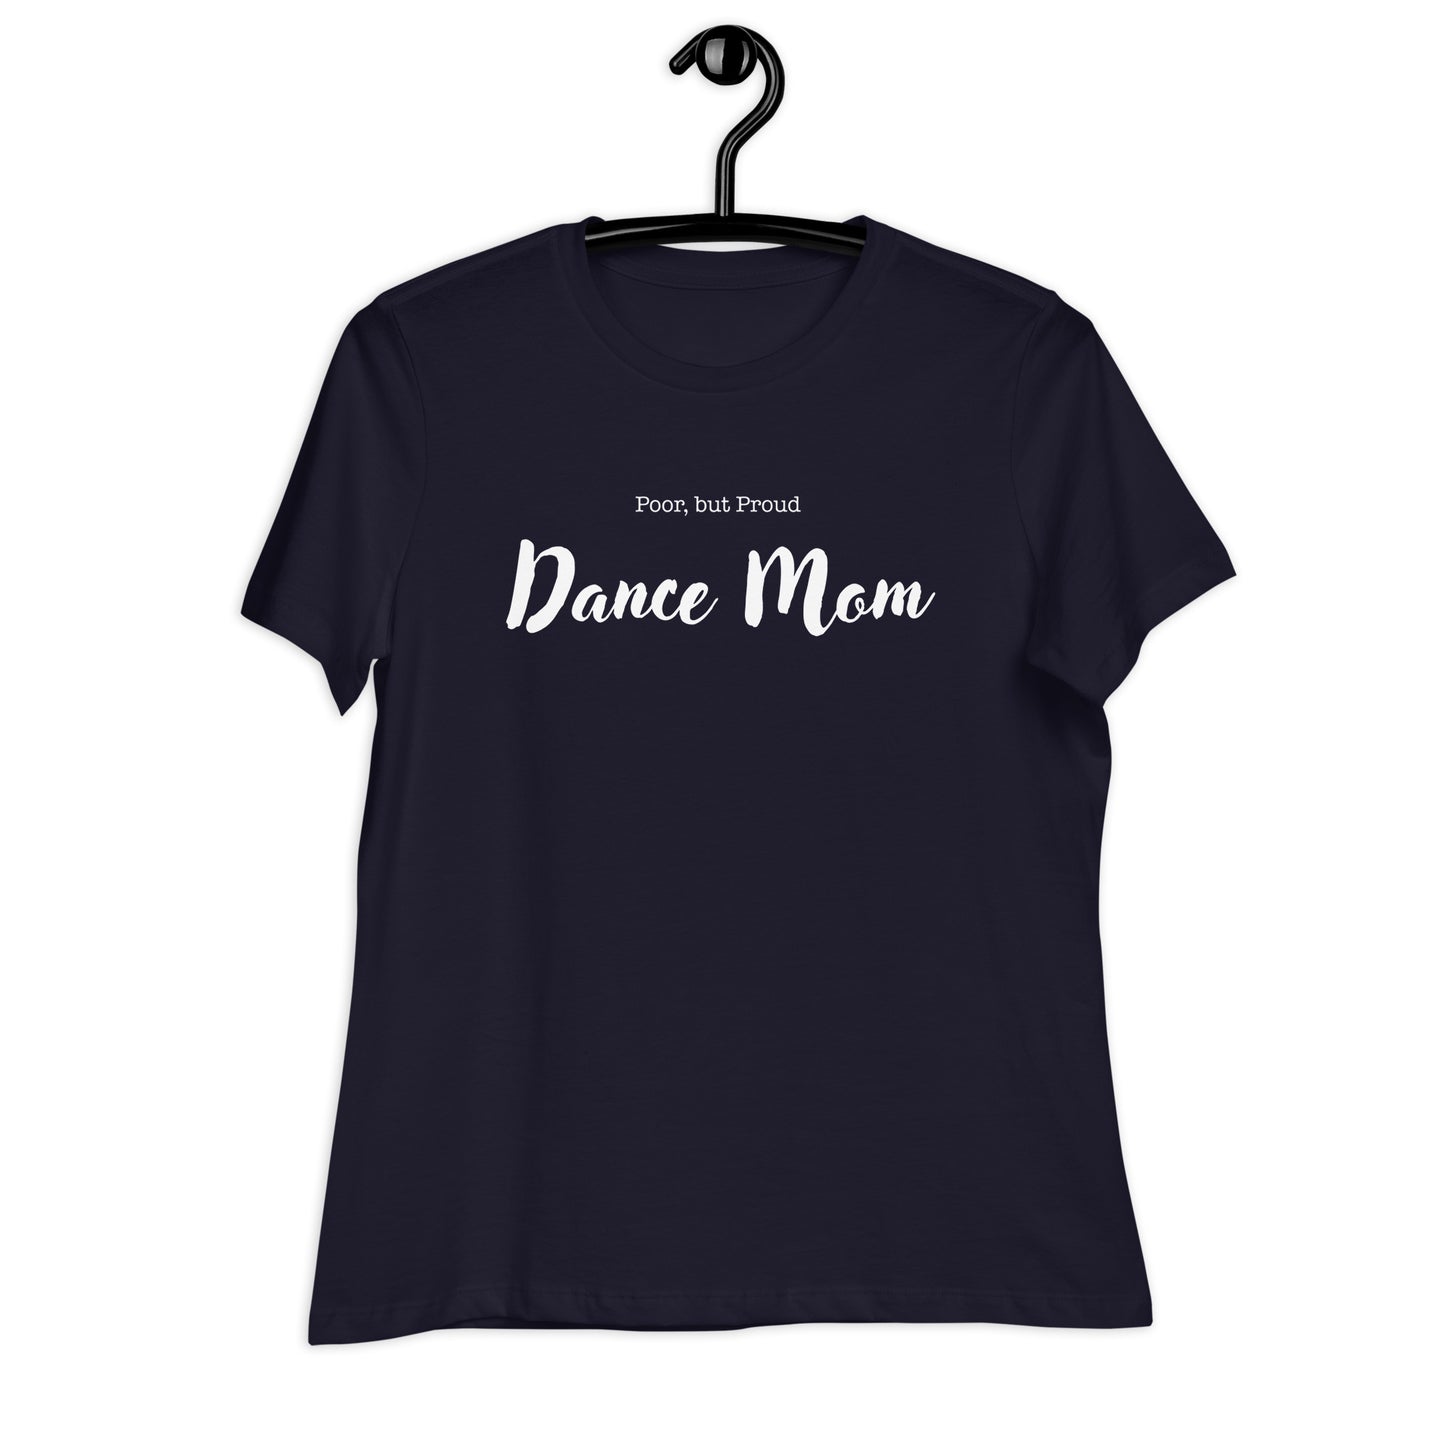 Poor but Proud Dance Mom Women's Relaxed Bella + Canvas T-Shirt